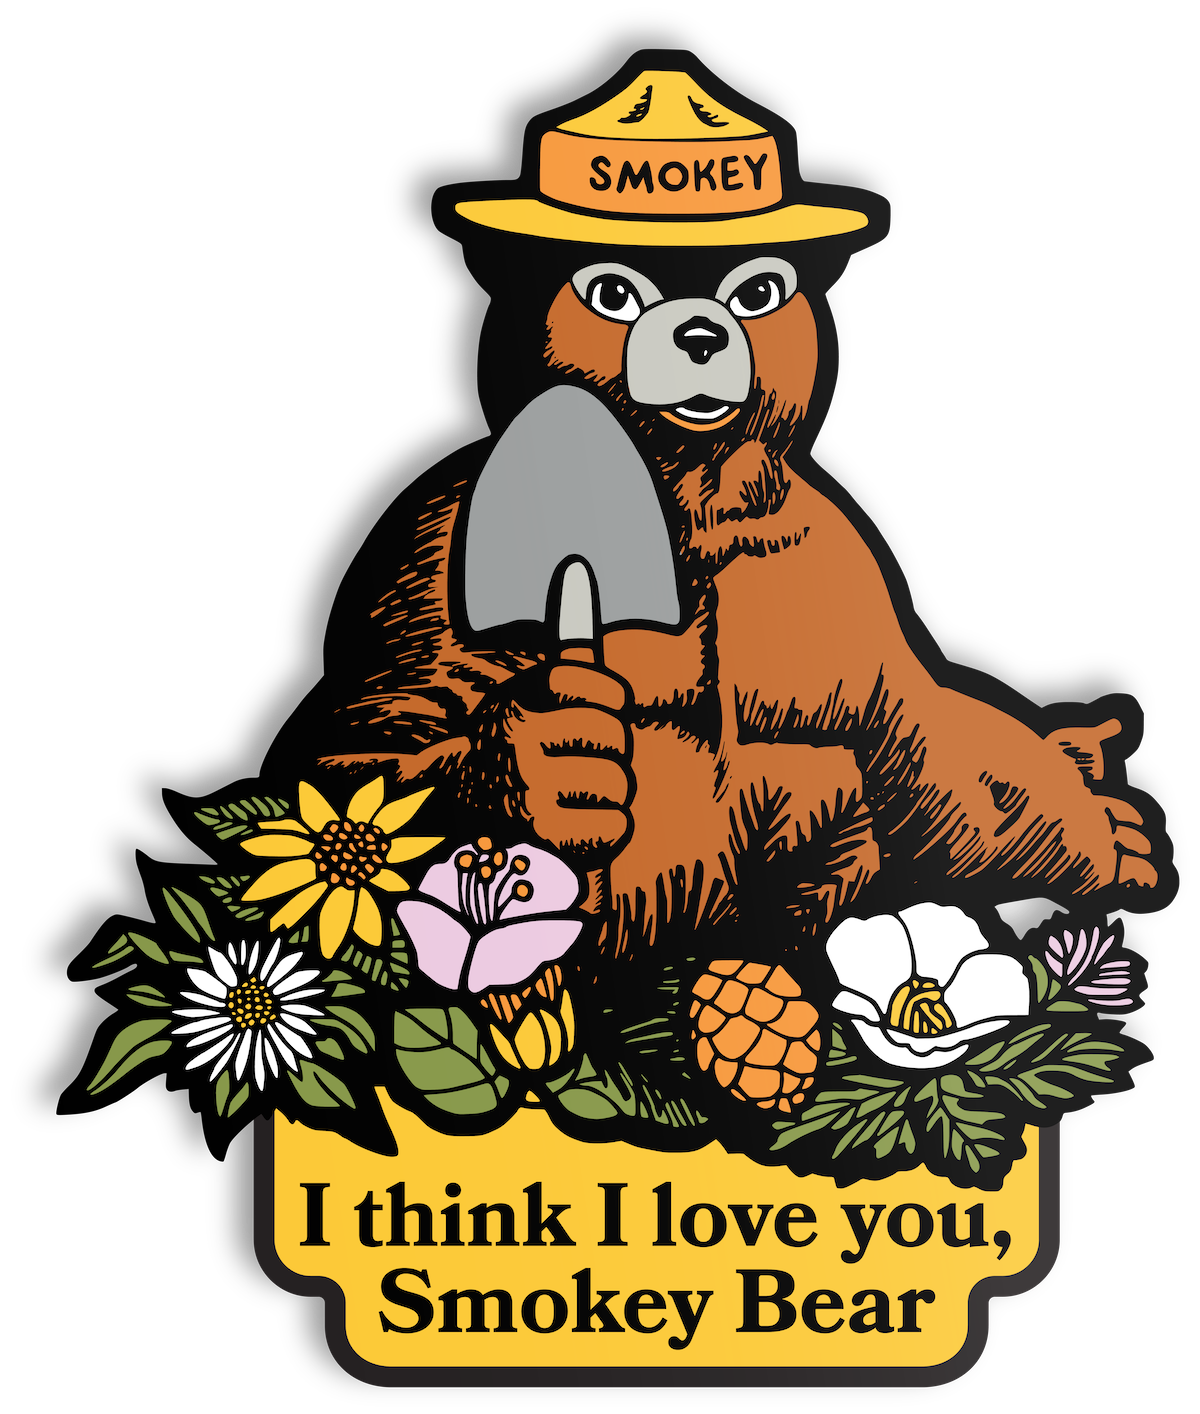 why-is-smokey-bear-on-tv-so-much-lately